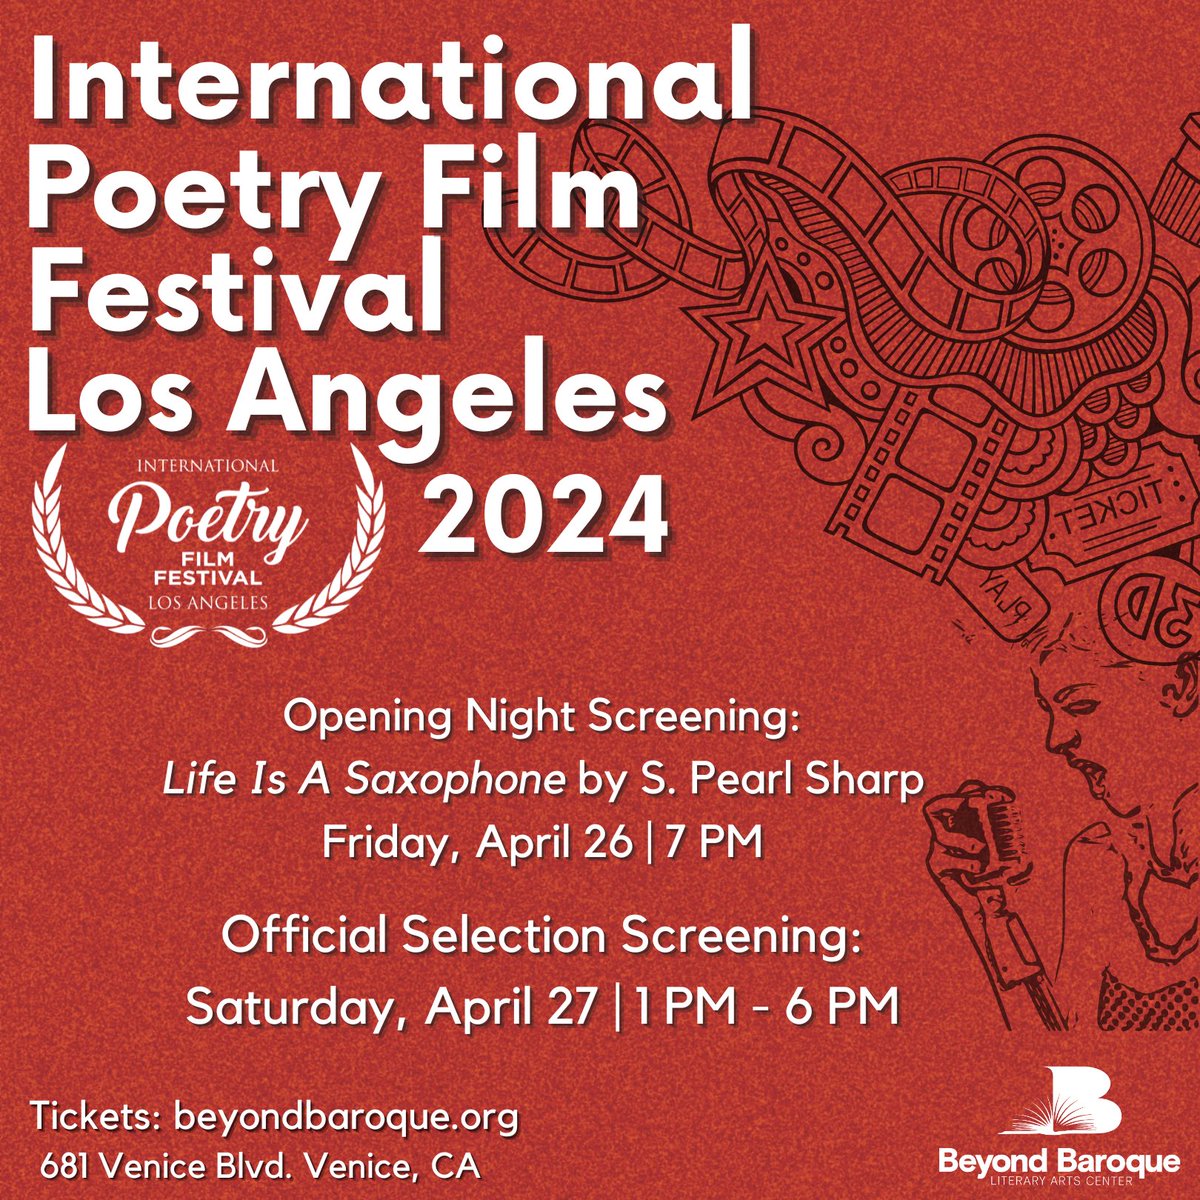 ￼ 🎞️ The 3rd annual International Poetry Film Festival, Los Angeles, at Beyond Baroque features screenings of nearly 40 poetry-based films from around the world, including selections from France, India, Belgium, Ireland, and the U.S. 🎟️ Get tickets now! eventbrite.com/e/internationa…